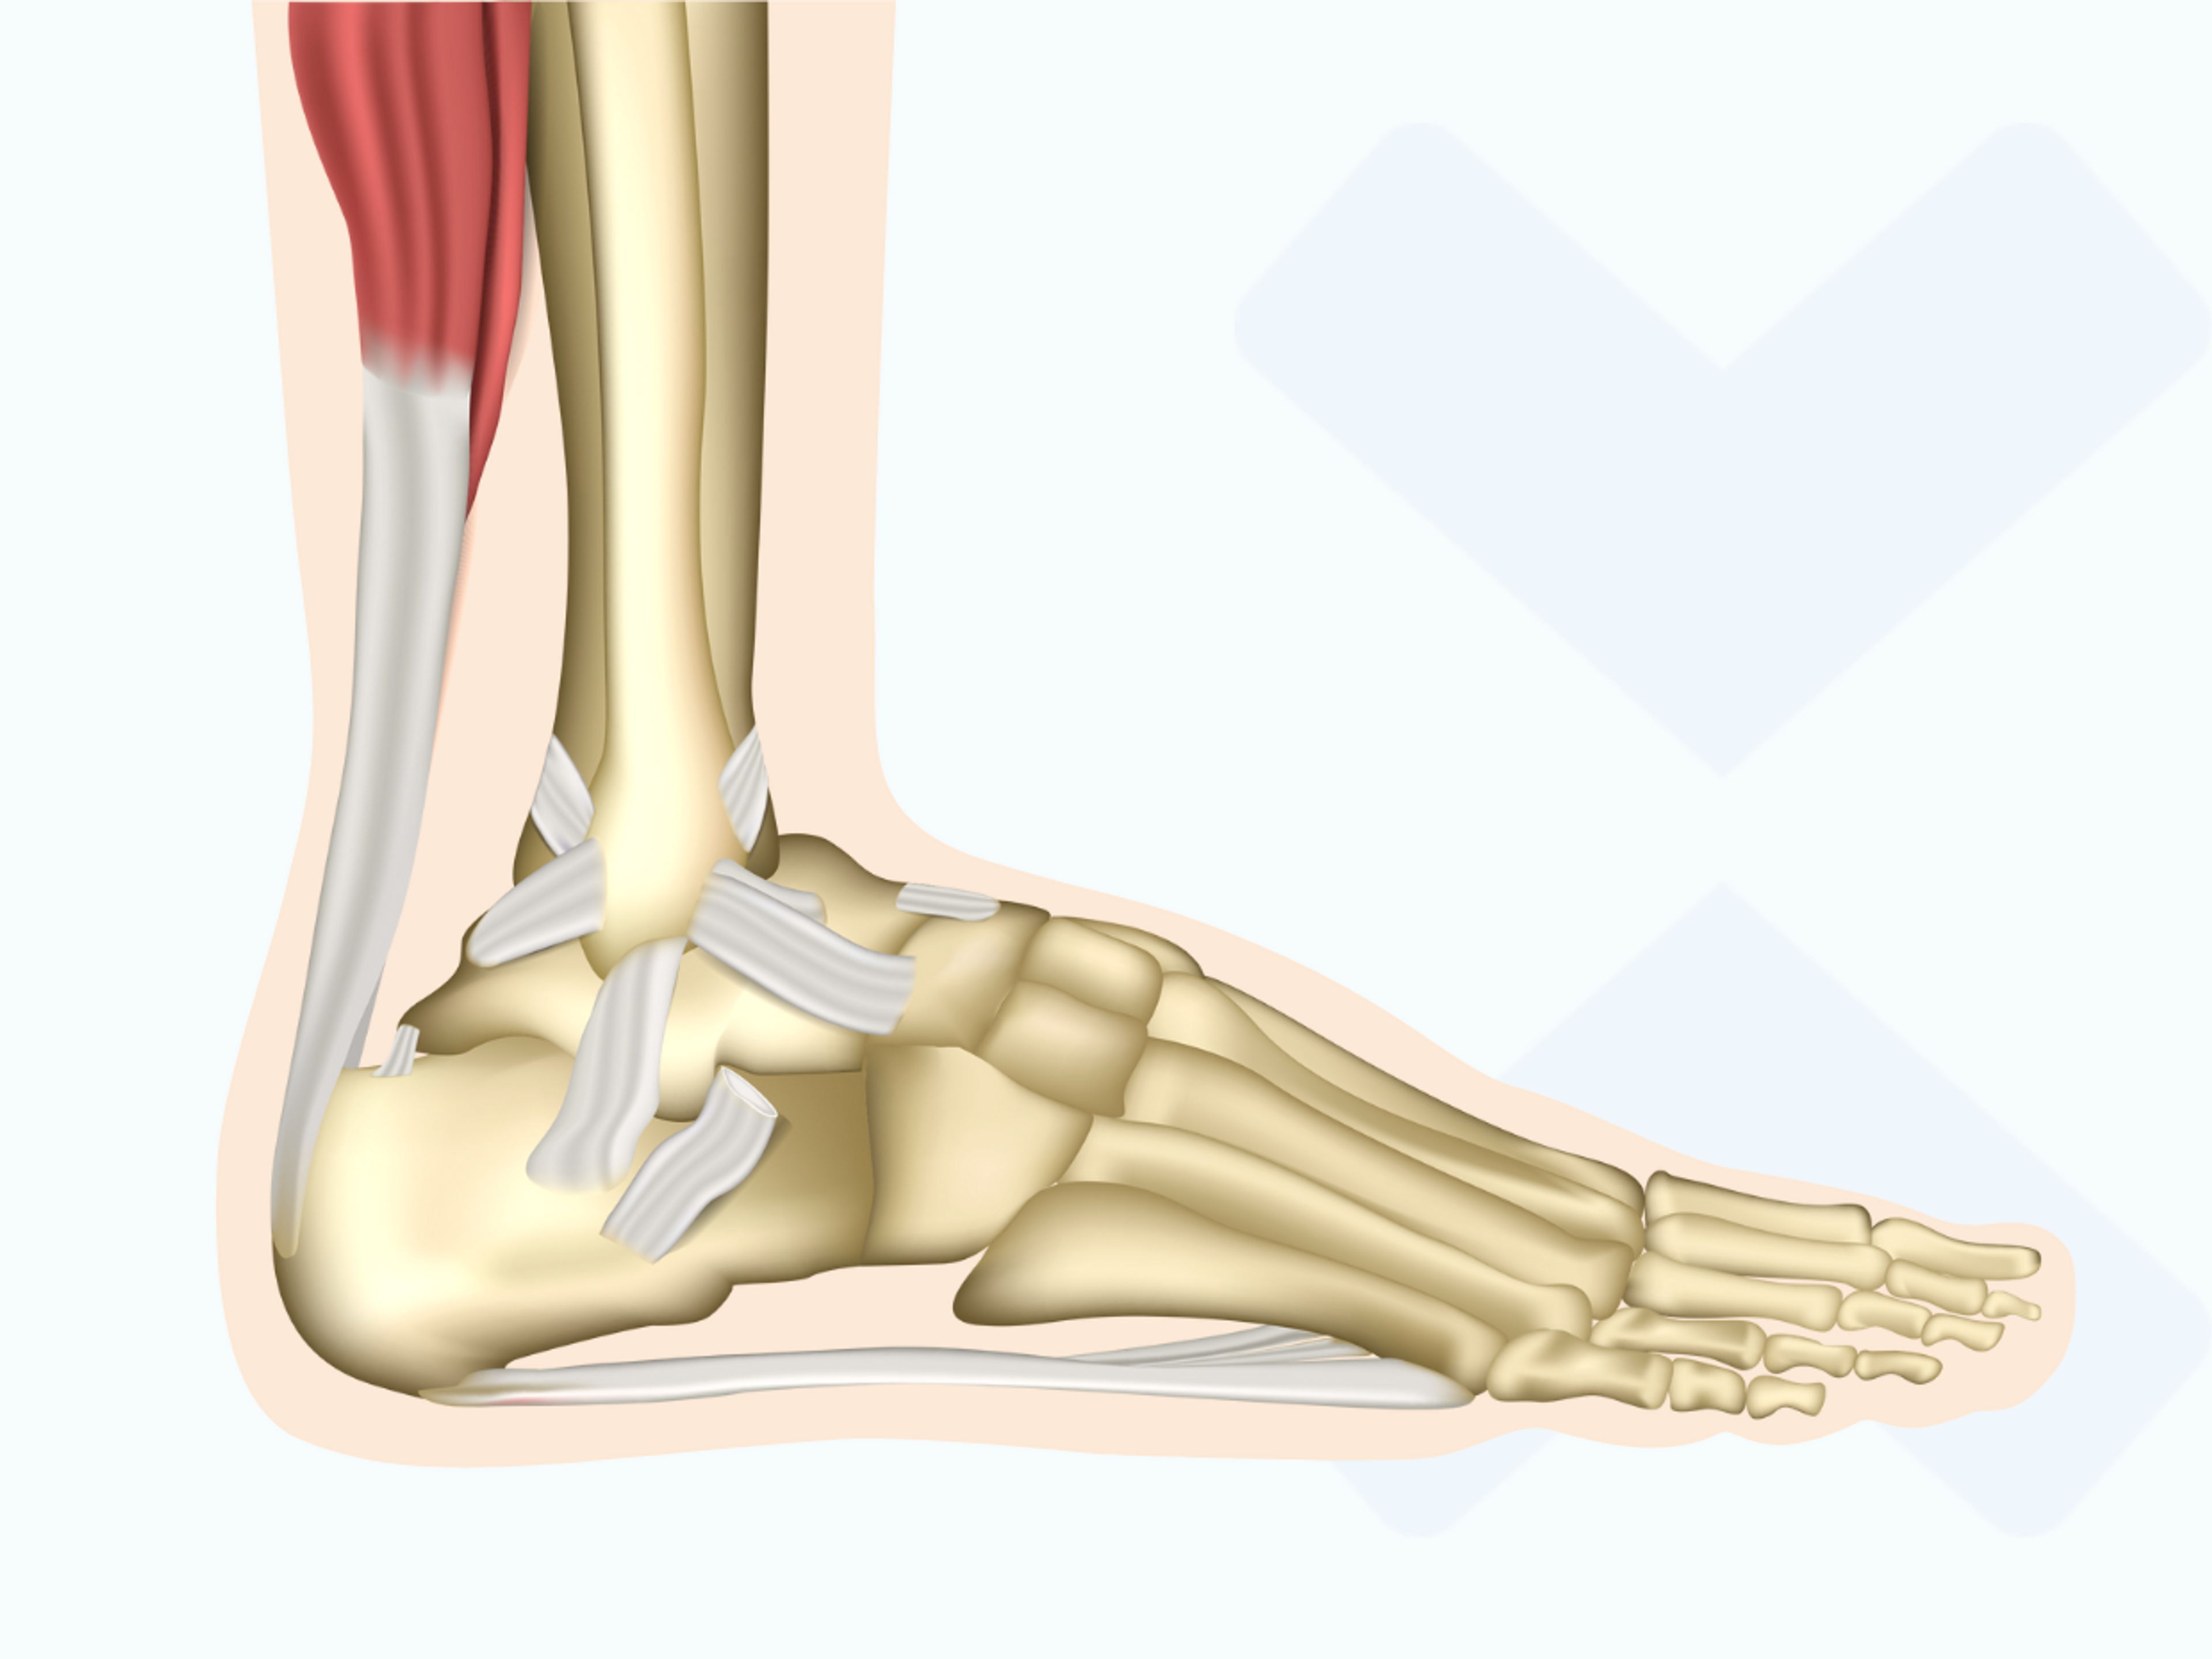 Ankle sprain ligaments